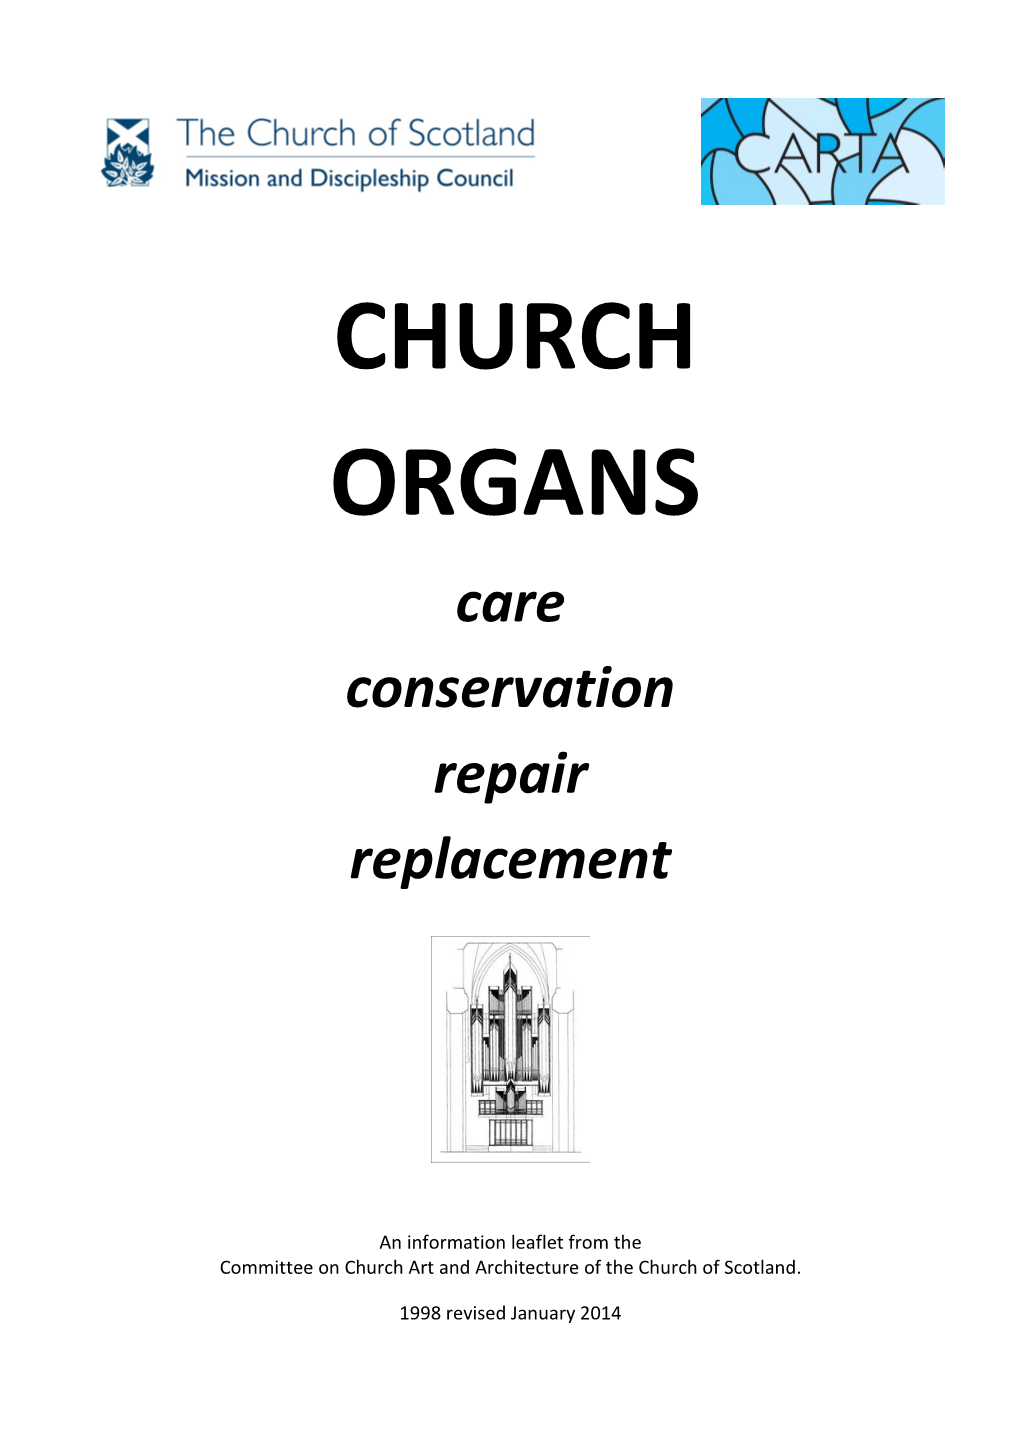 CHURCH ORGANS Care Conservation Repair Replacement